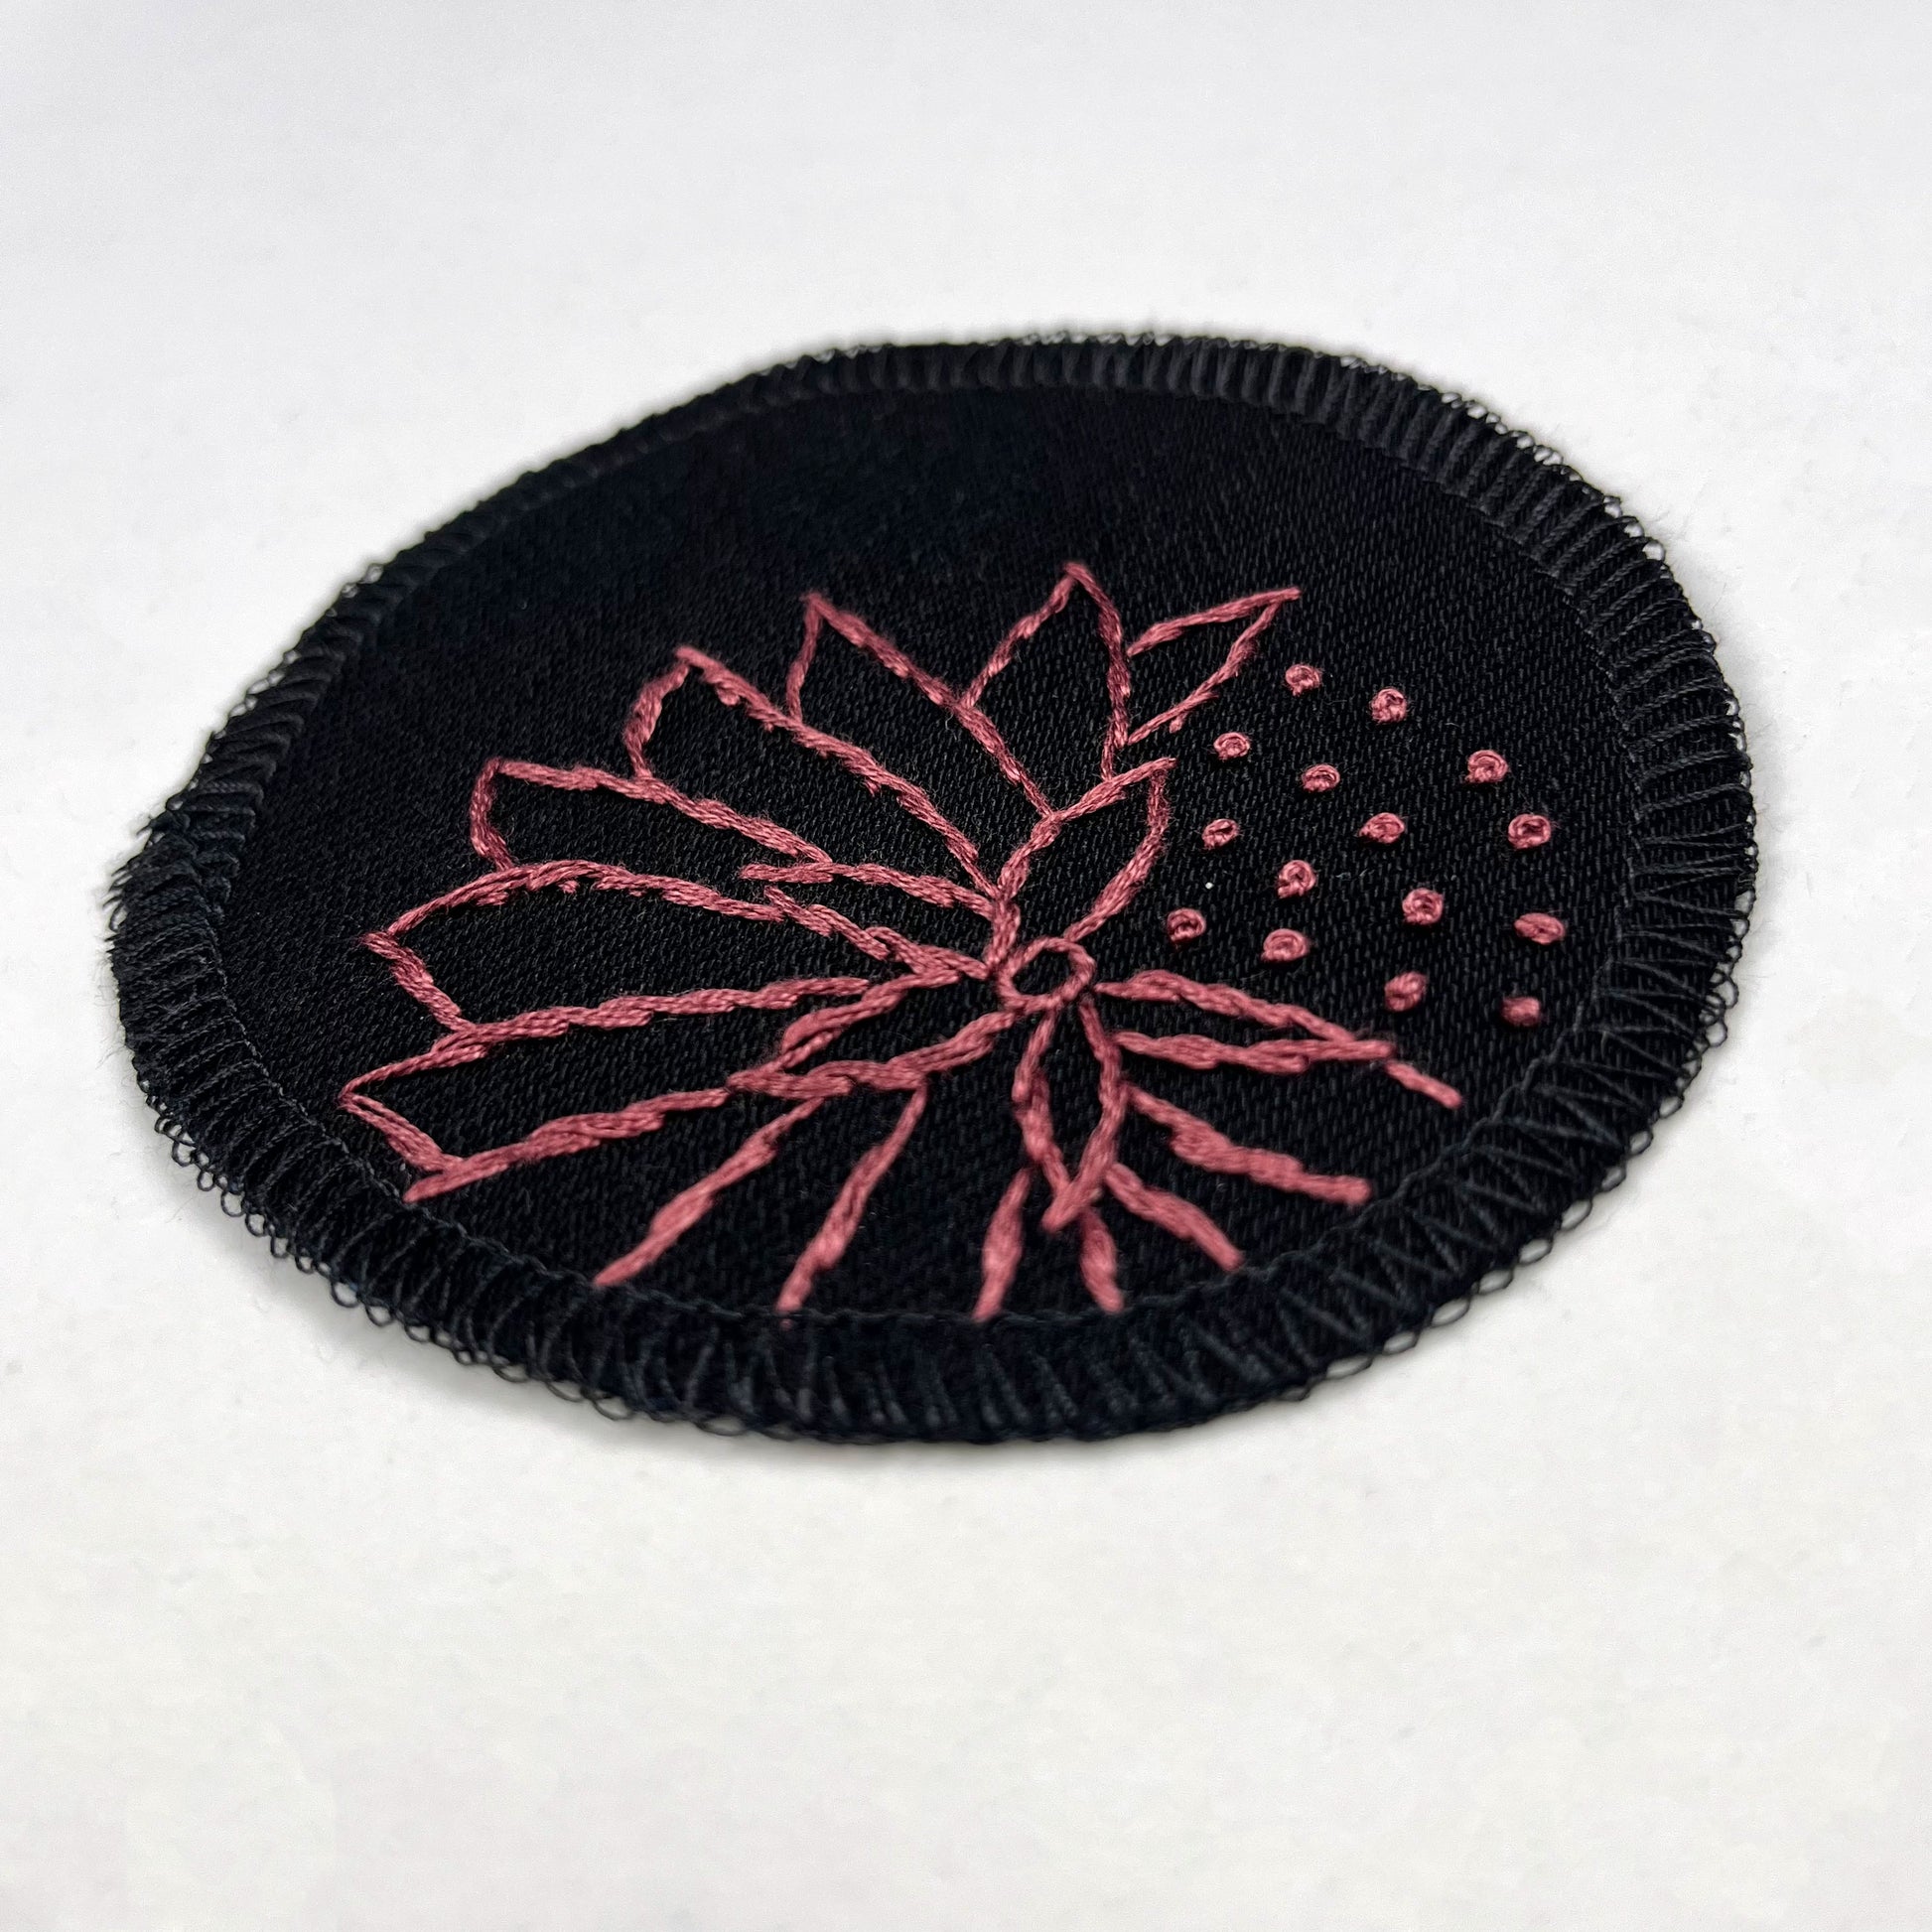 a circle shaped patch made out of black twill weave fabric, hand embroidered with an abstract dandelion in plum colored floss, outlines of petals, edges overlocked in black, on a white background